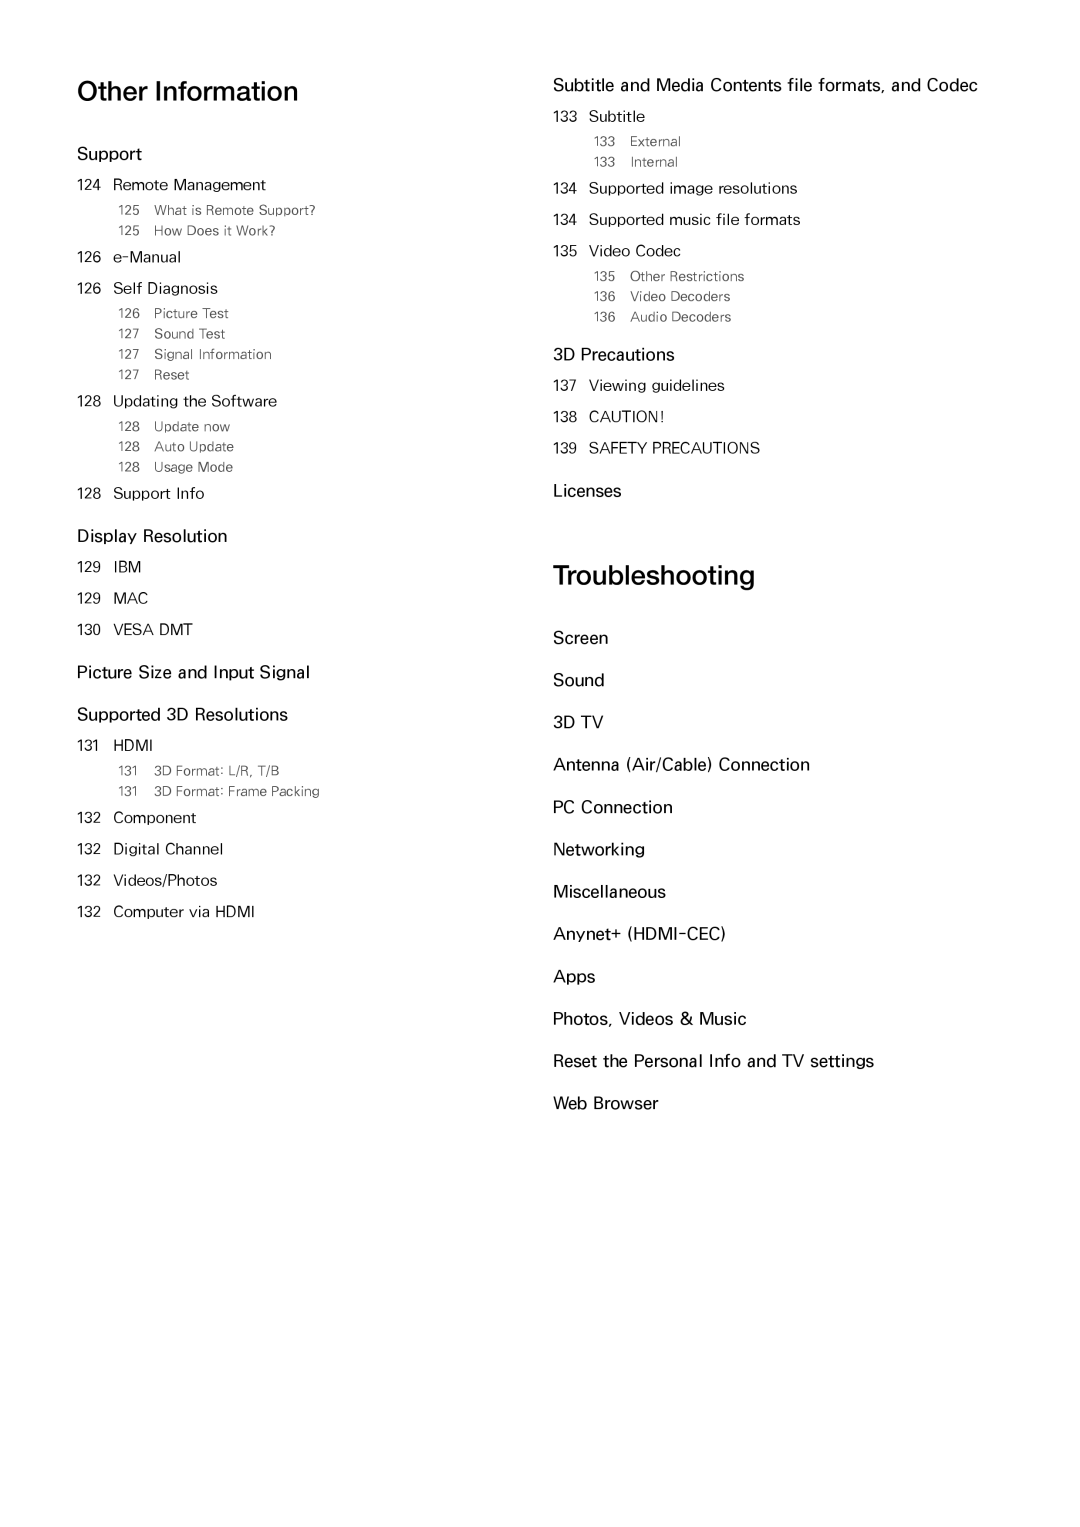 Samsung SEK-1000 manual Other Information, Troubleshooting 